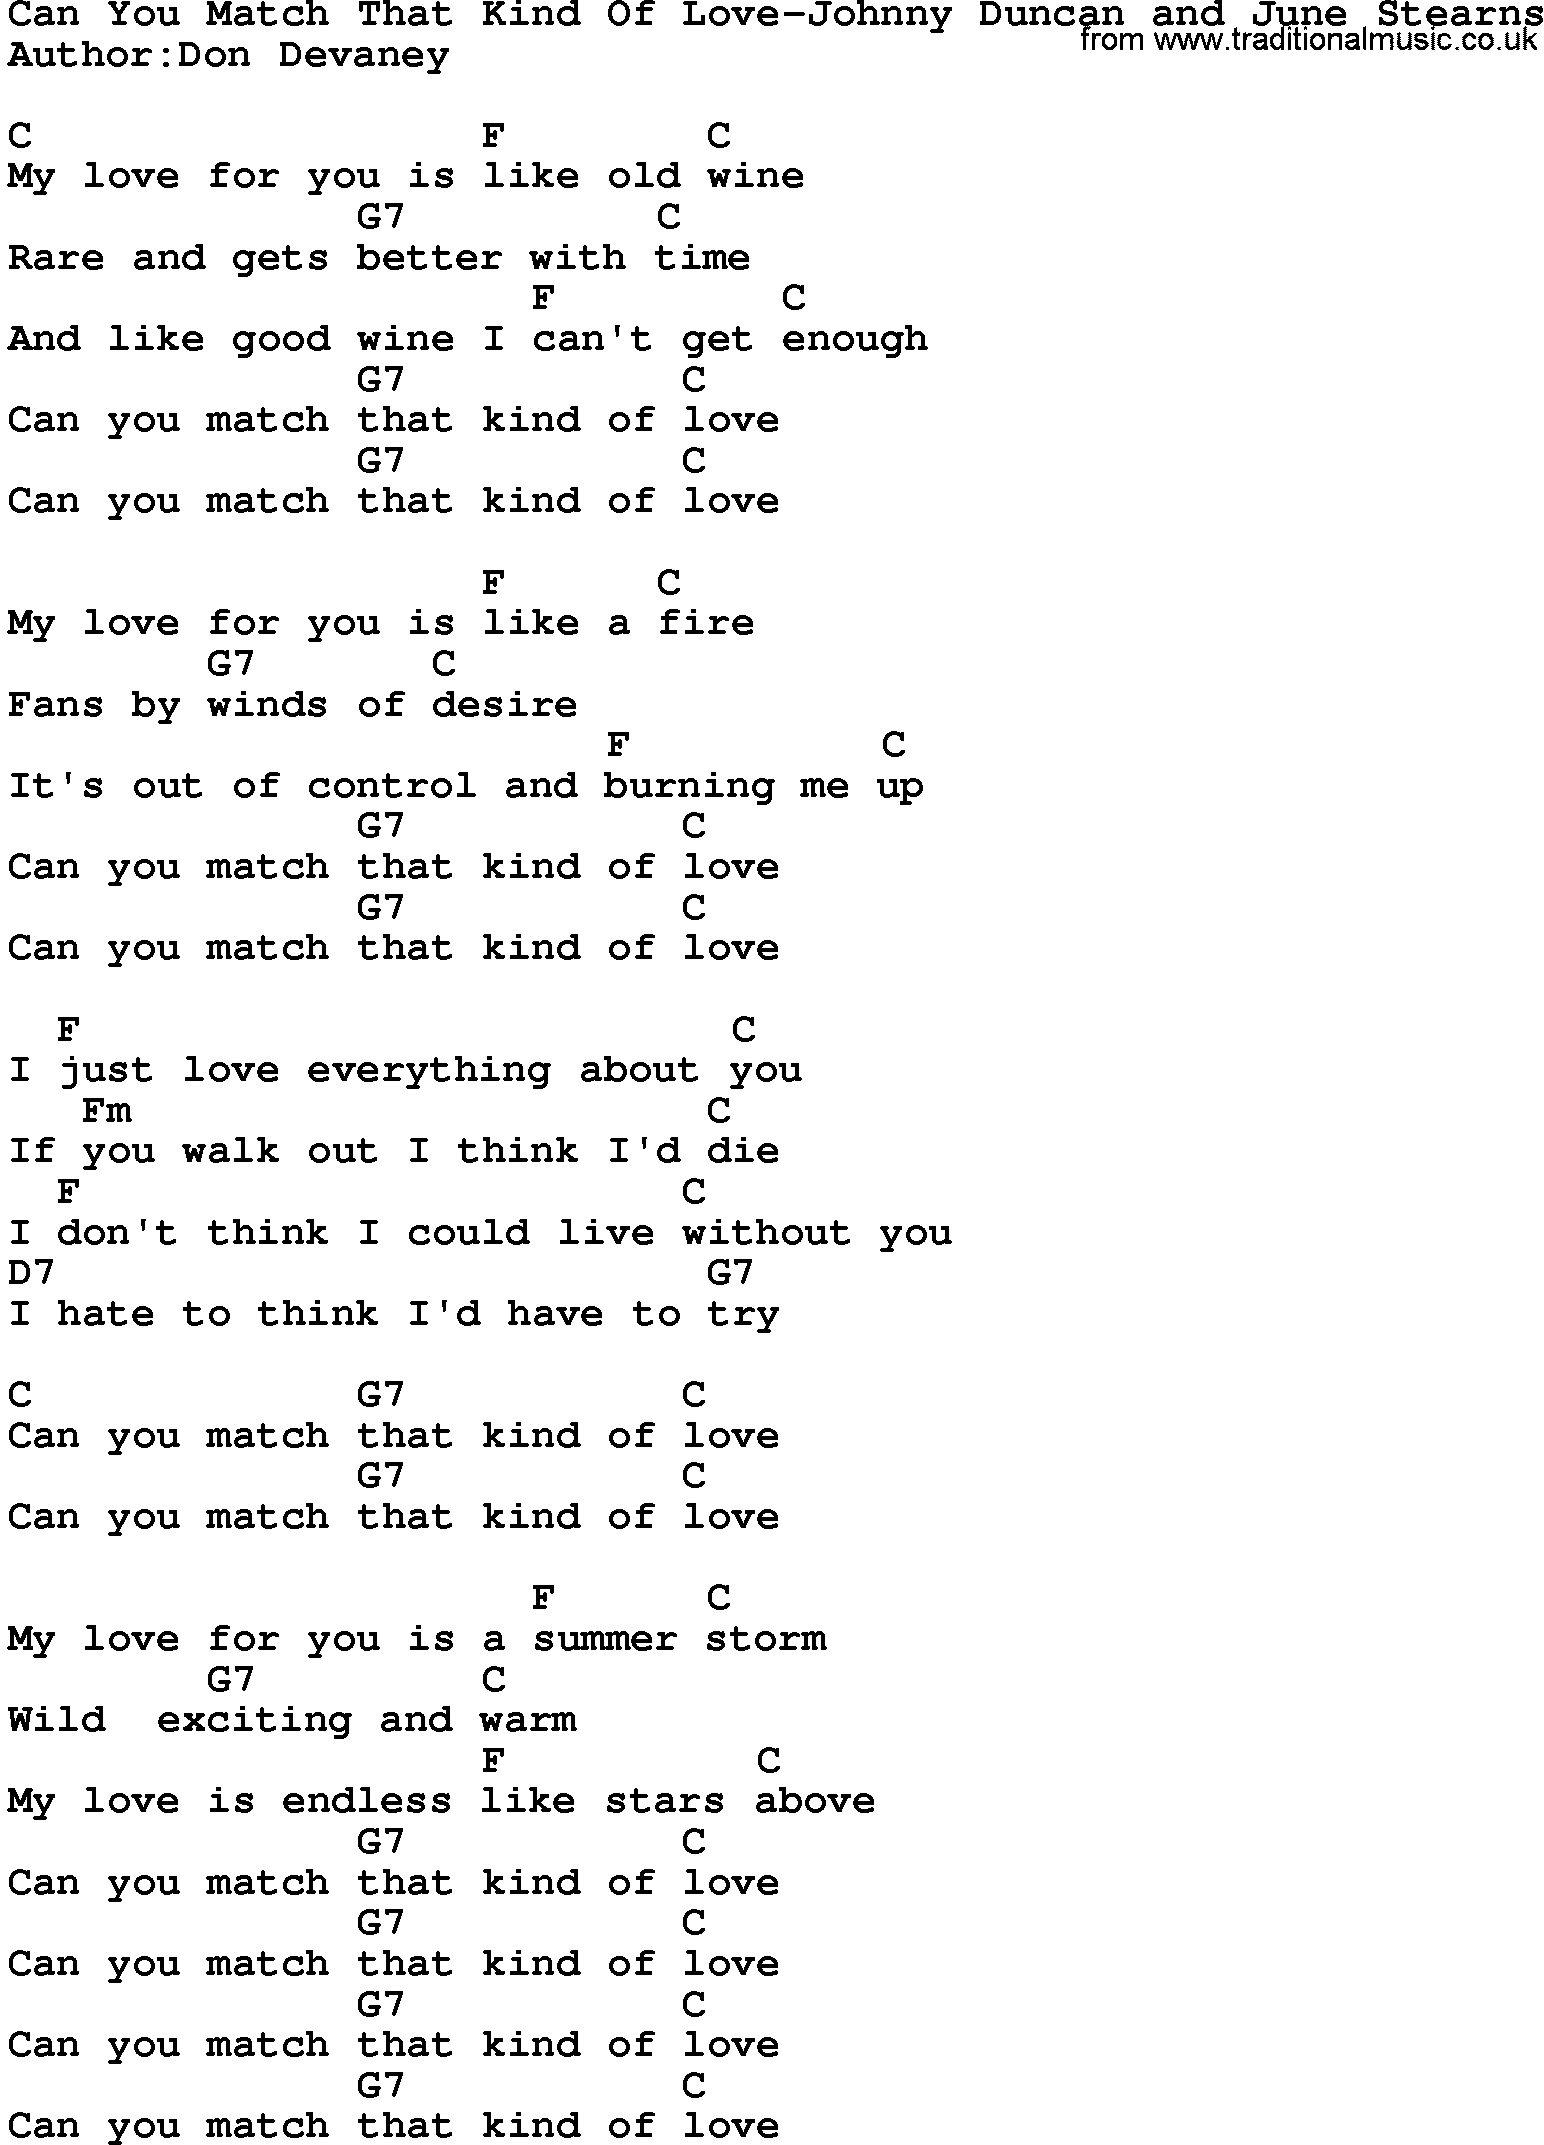 Country music song: Can You Match That Kind Of Love-Johnny Duncan And June Stearns lyrics and chords